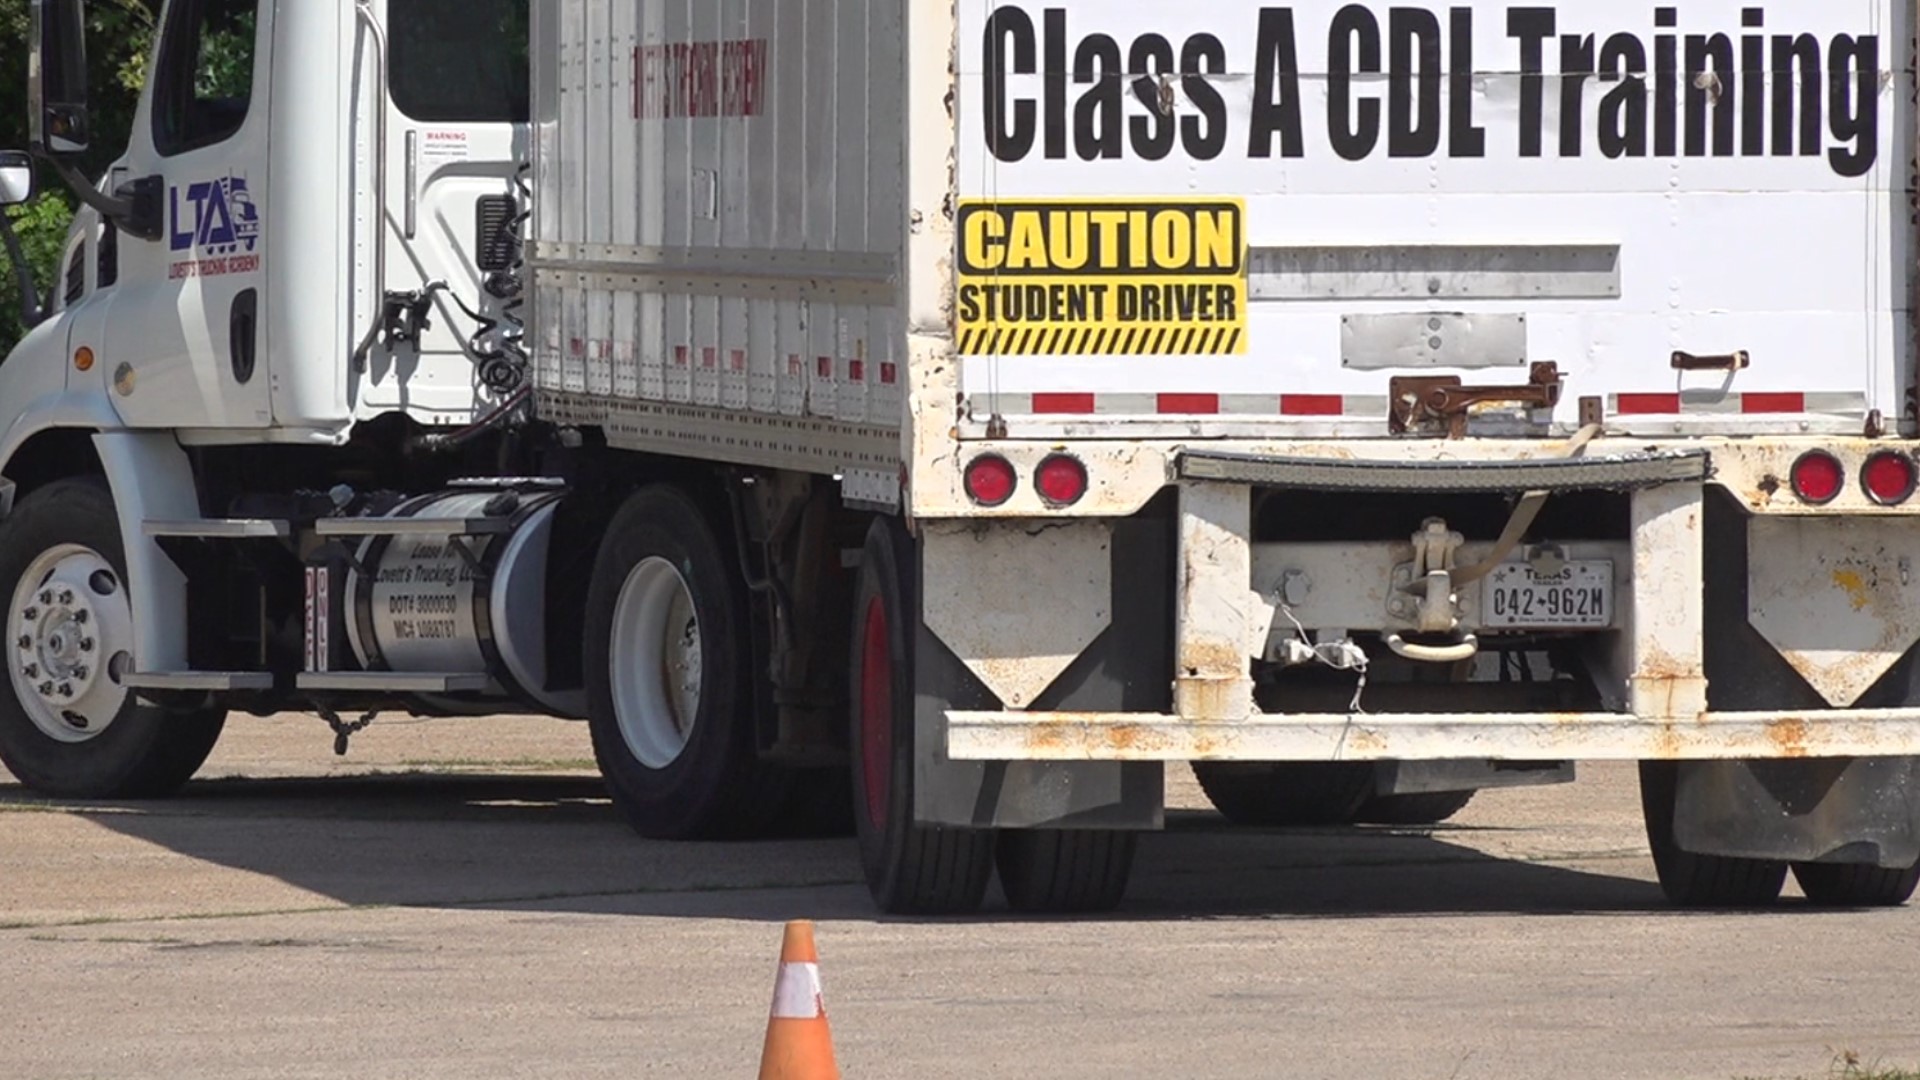 With 7 years of experience, Kimah Lovett Sr. says regular drivers play a role in helping prevent deadly accidents when around 18-wheelers or larger trucks.